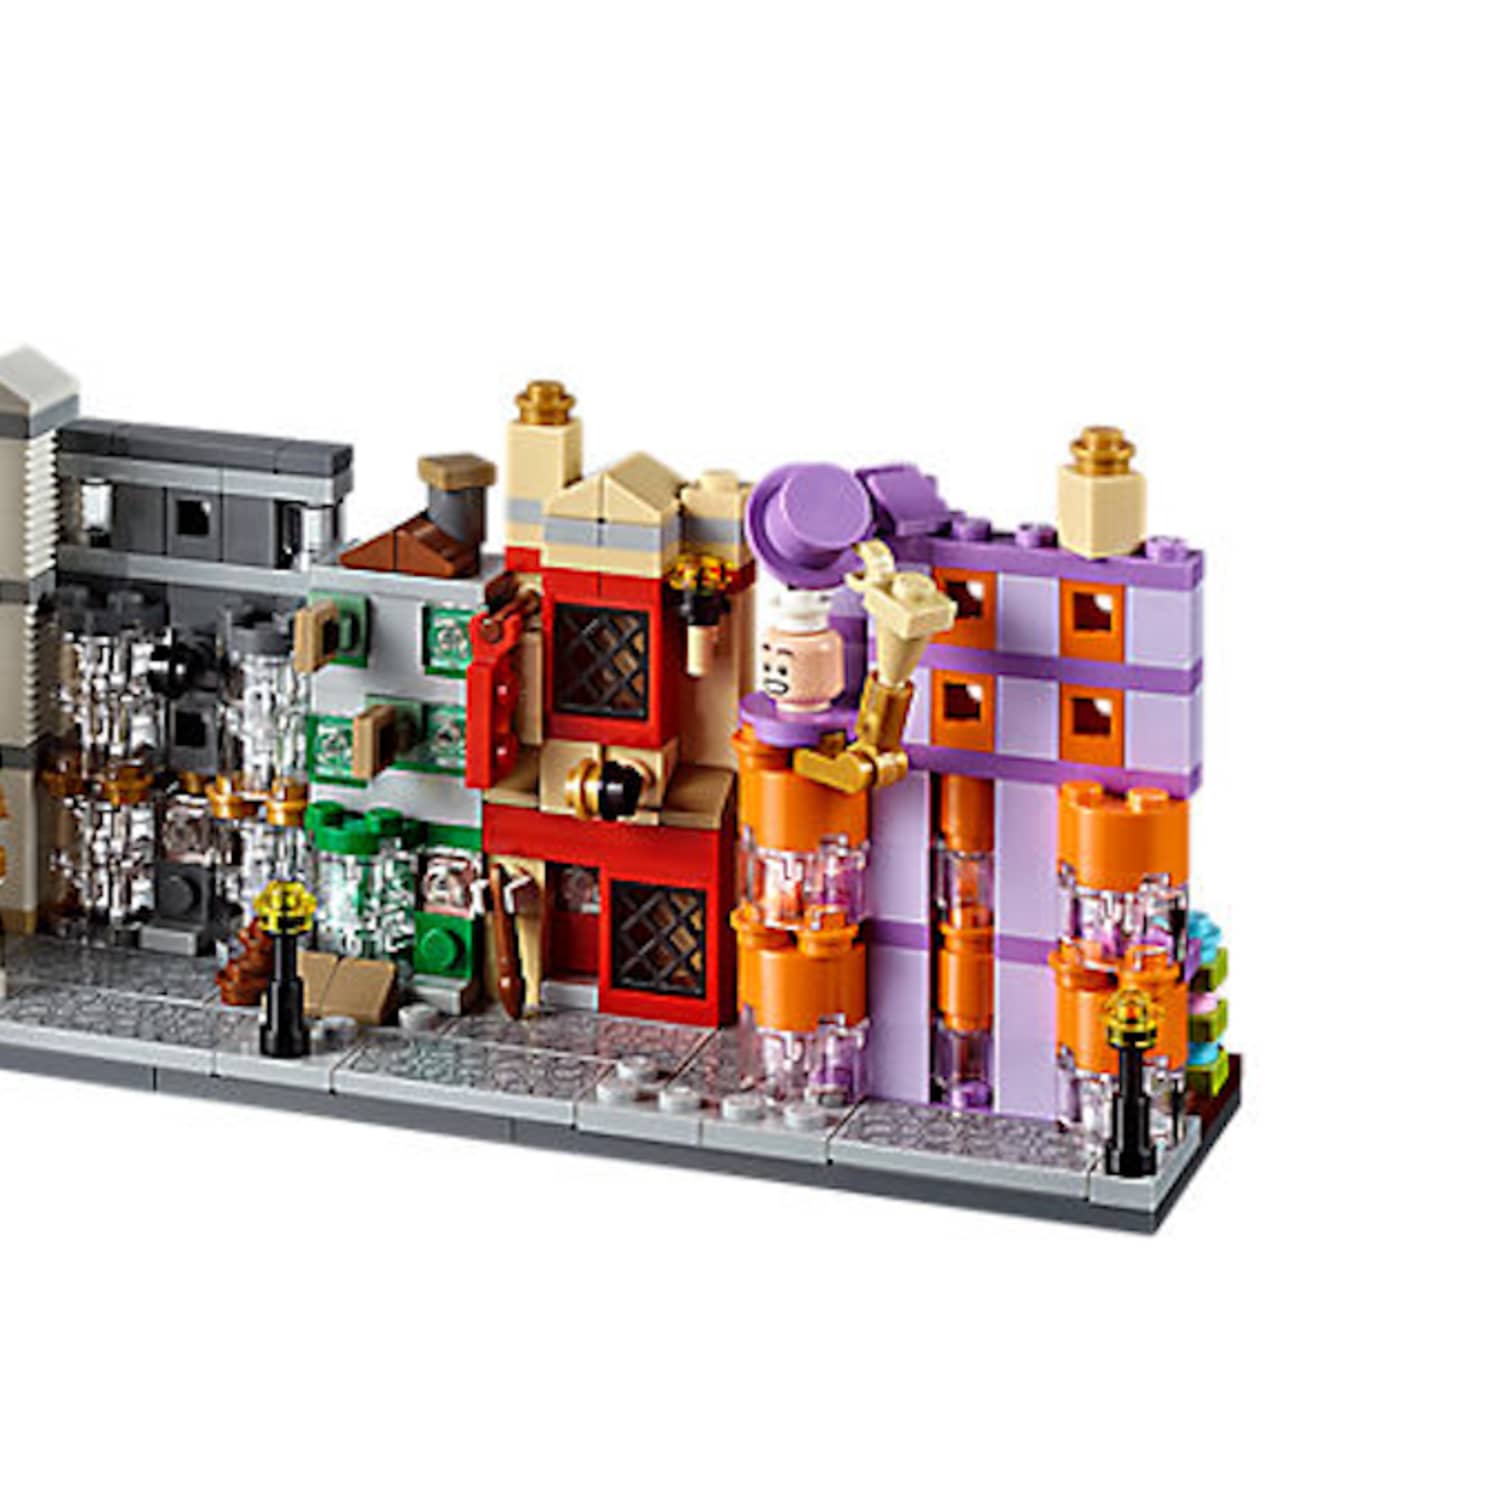 LEGO Is Giving Away a Free Diagon Alley Set This November